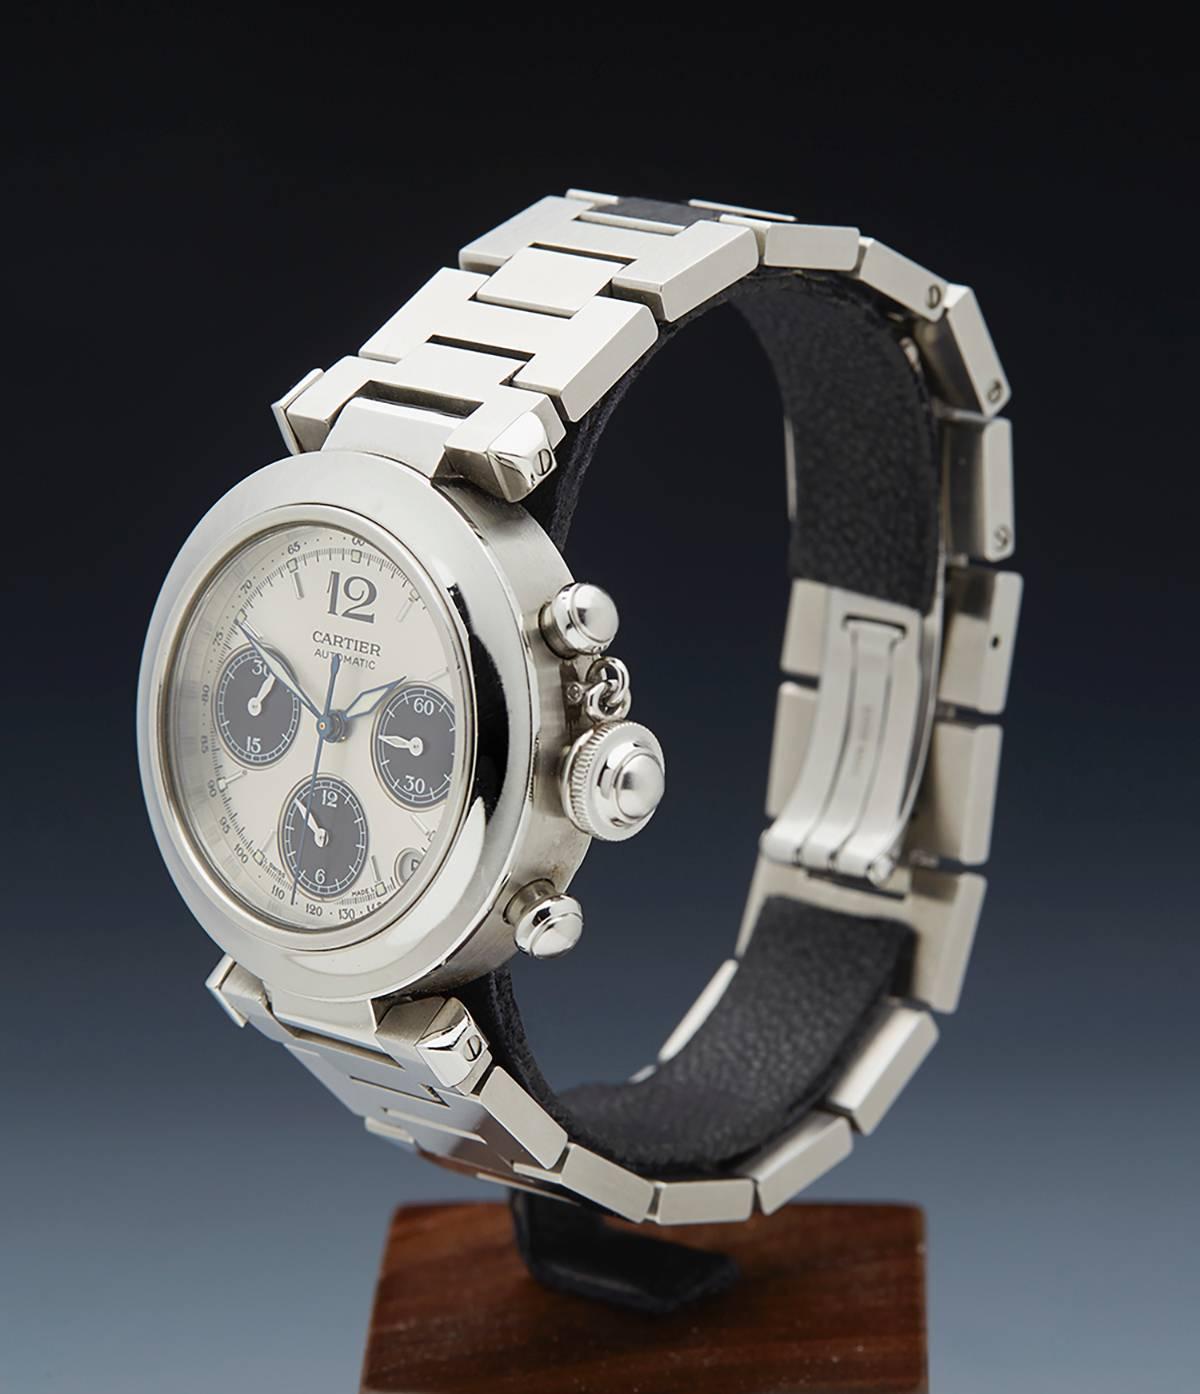 Specifications

Movement: Automatic
Case: Stainless Steel
Case Diameter: 36mm
Dial: Silver & Black
Bracelet: Stainless Steel
Buckle: Stainless Steel Deployment Buckle
Glass: Sapphire Crystal
Water Resistance: To Manufacturers Specification